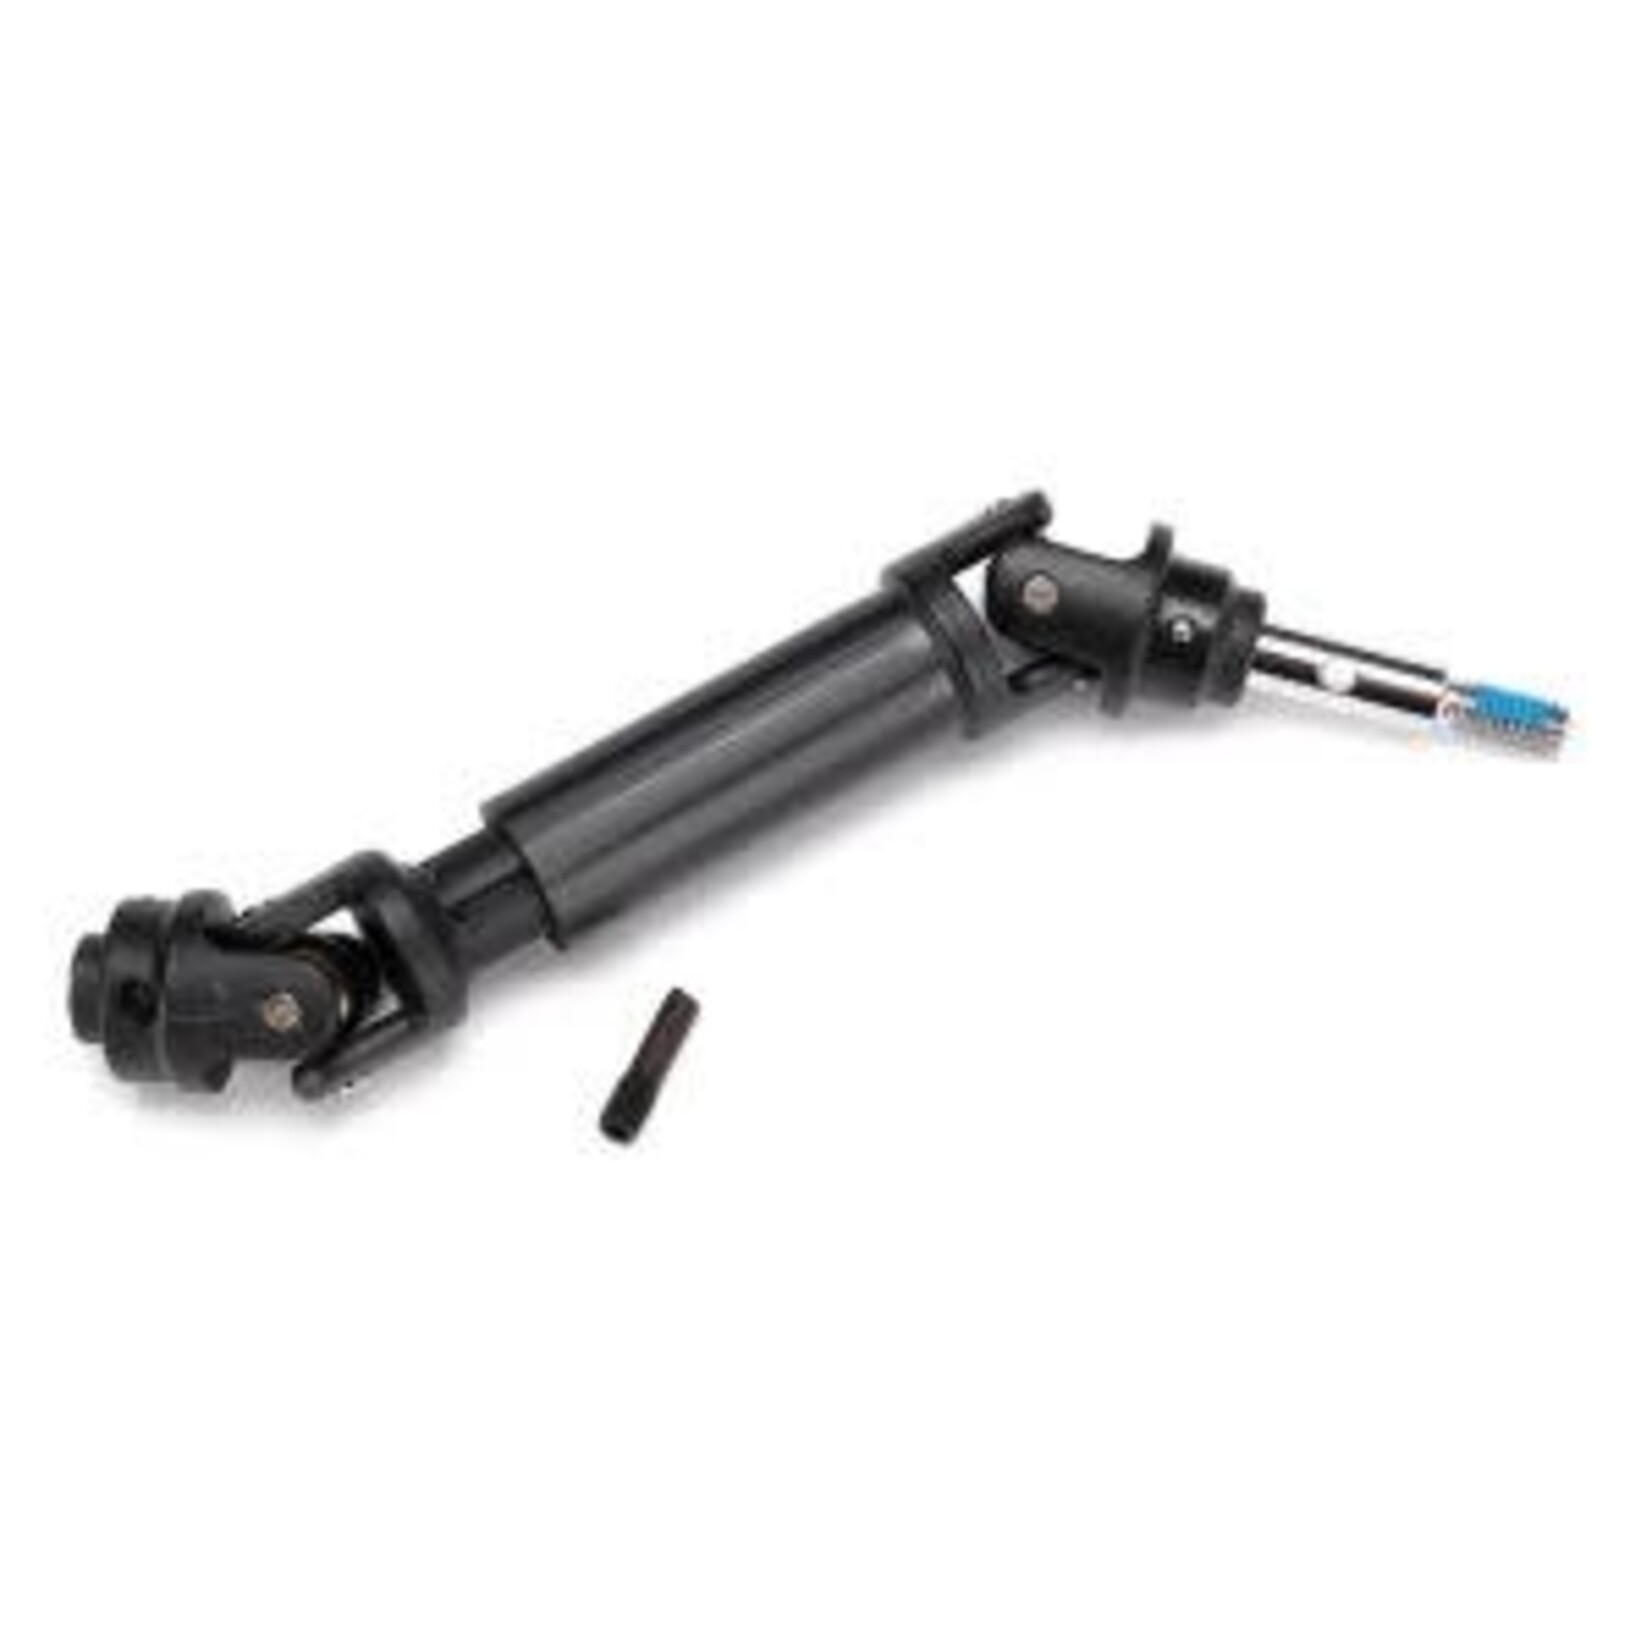 Traxxas 6760 Driveshaft assembly, front, heavy duty (1) (left or right) (fully assembled, ready to install)/ screw pin (1)